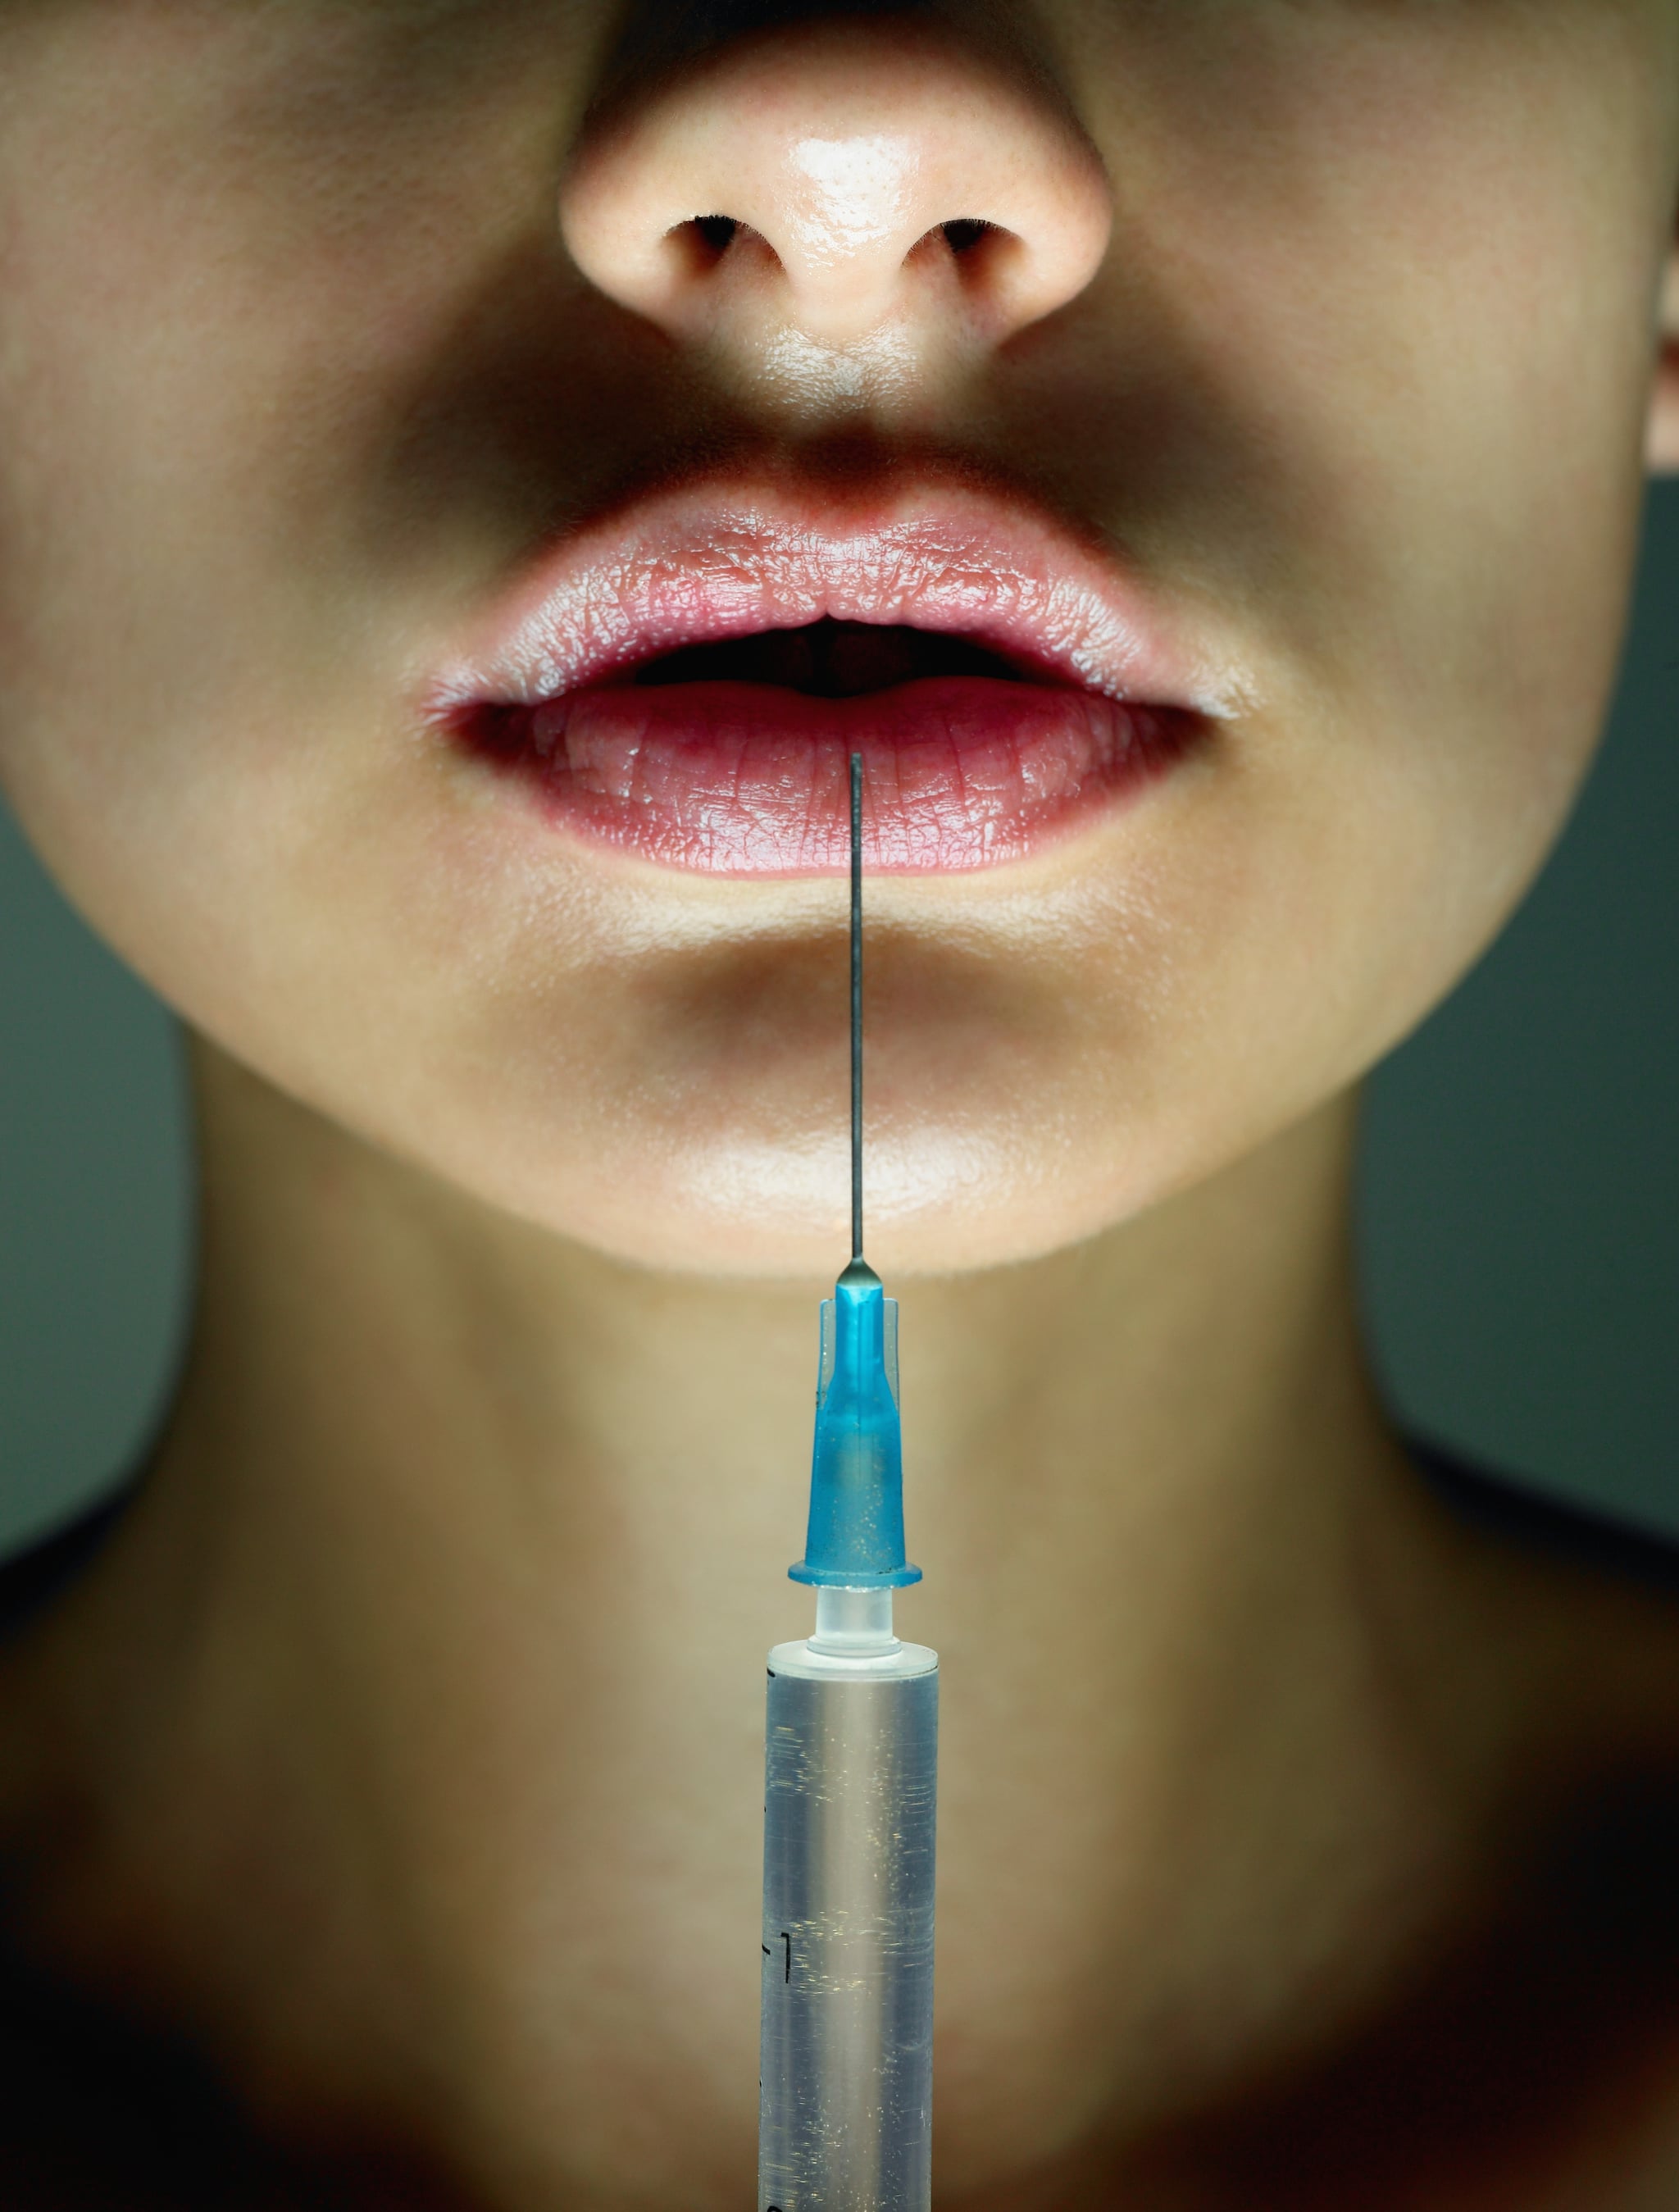 Woman getting lip filler injections.